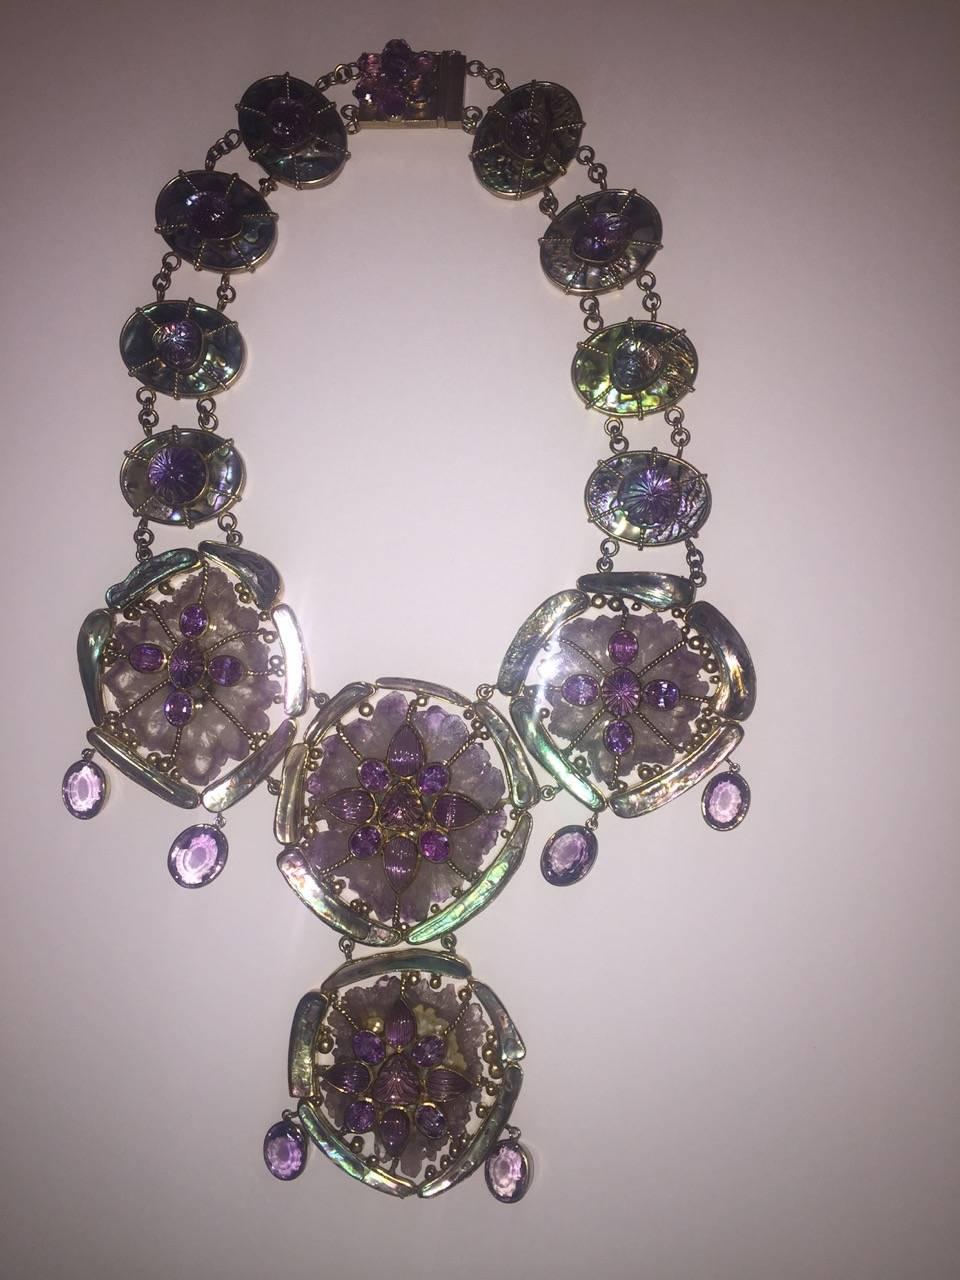 Tony Duquette impressive very large amethyst abalone unique necklace of extraordinary size. A special order one-of-a-kind necklace by the famed Duchess of Windsor favorite designer. The necklace is 28 inches long, each large amethyst motif at the